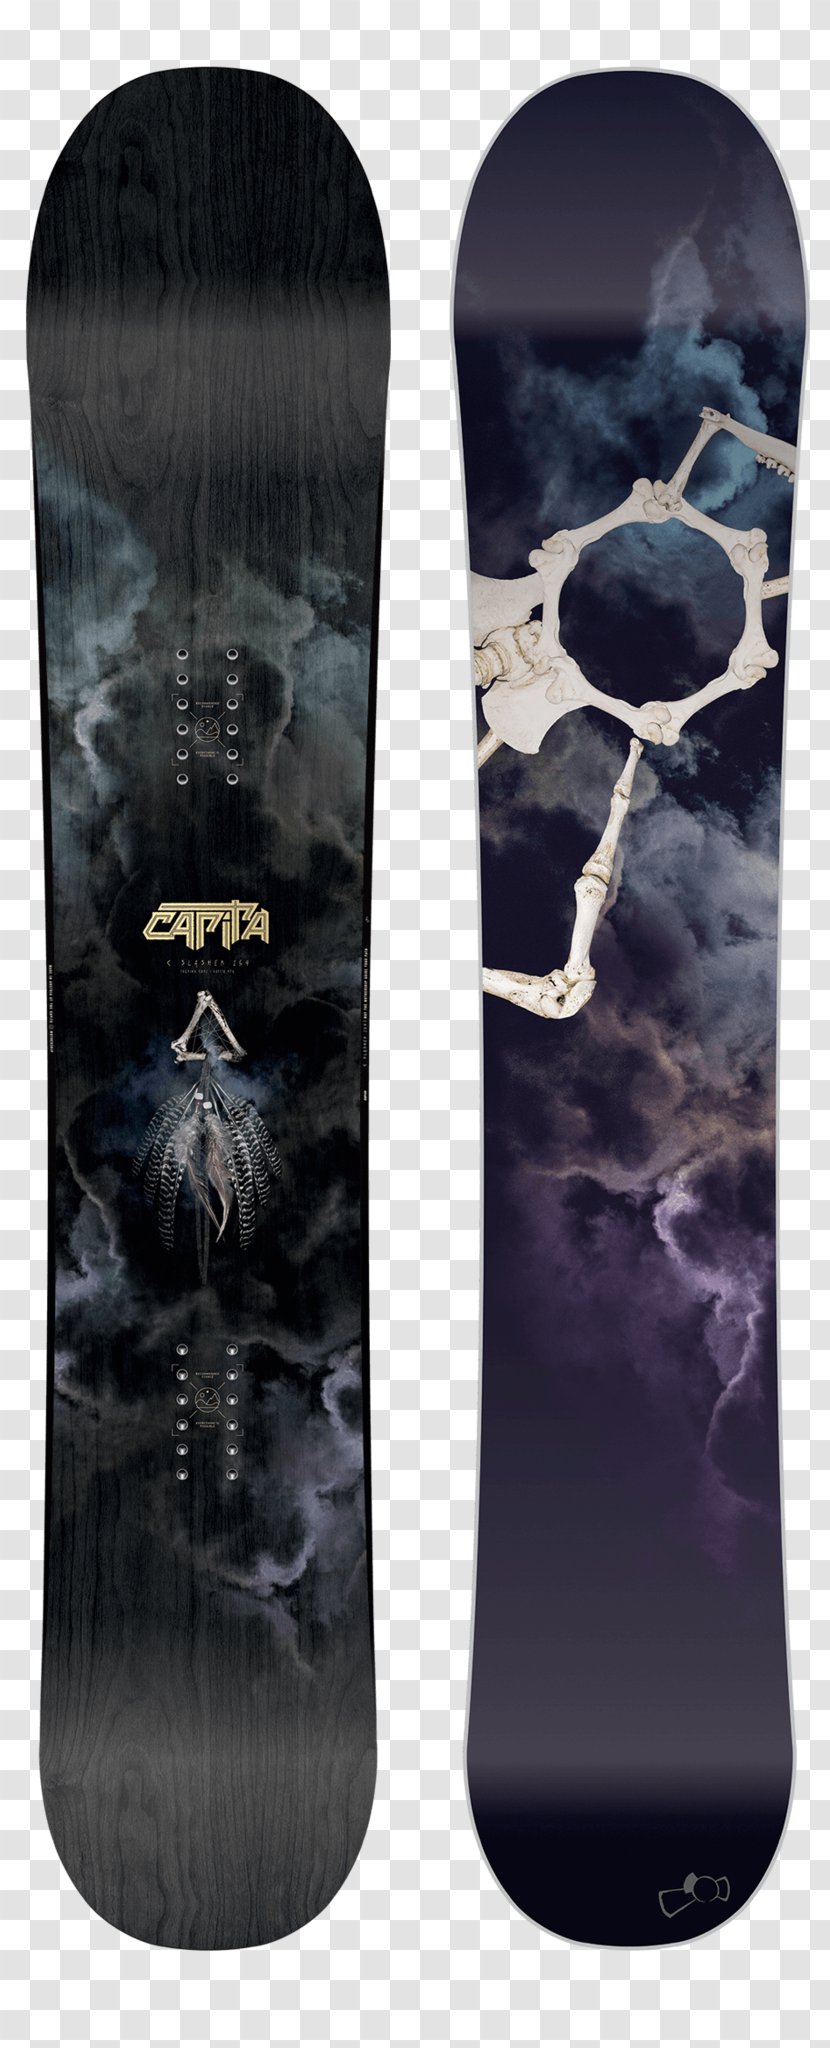 Snowboard Capita Bohle Freeriding Backcountry Skiing Transparent PNG